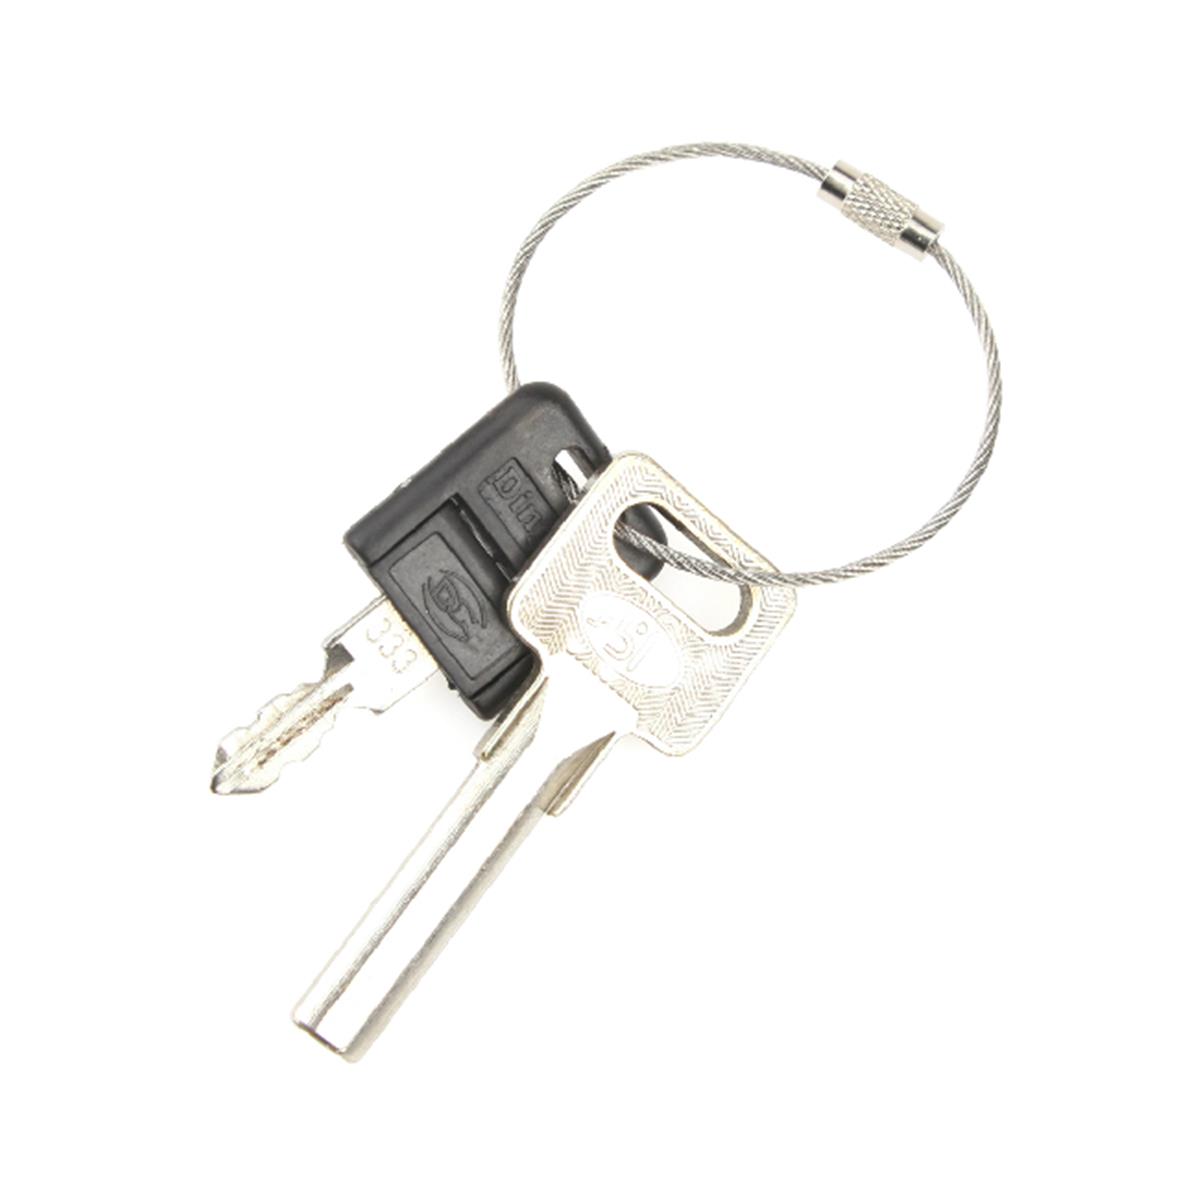 100Pcs-Stainless-Steel-Wires-Keychains-Carabiner-Key-Rings-Cables-Outdoor-Hiking-1263140